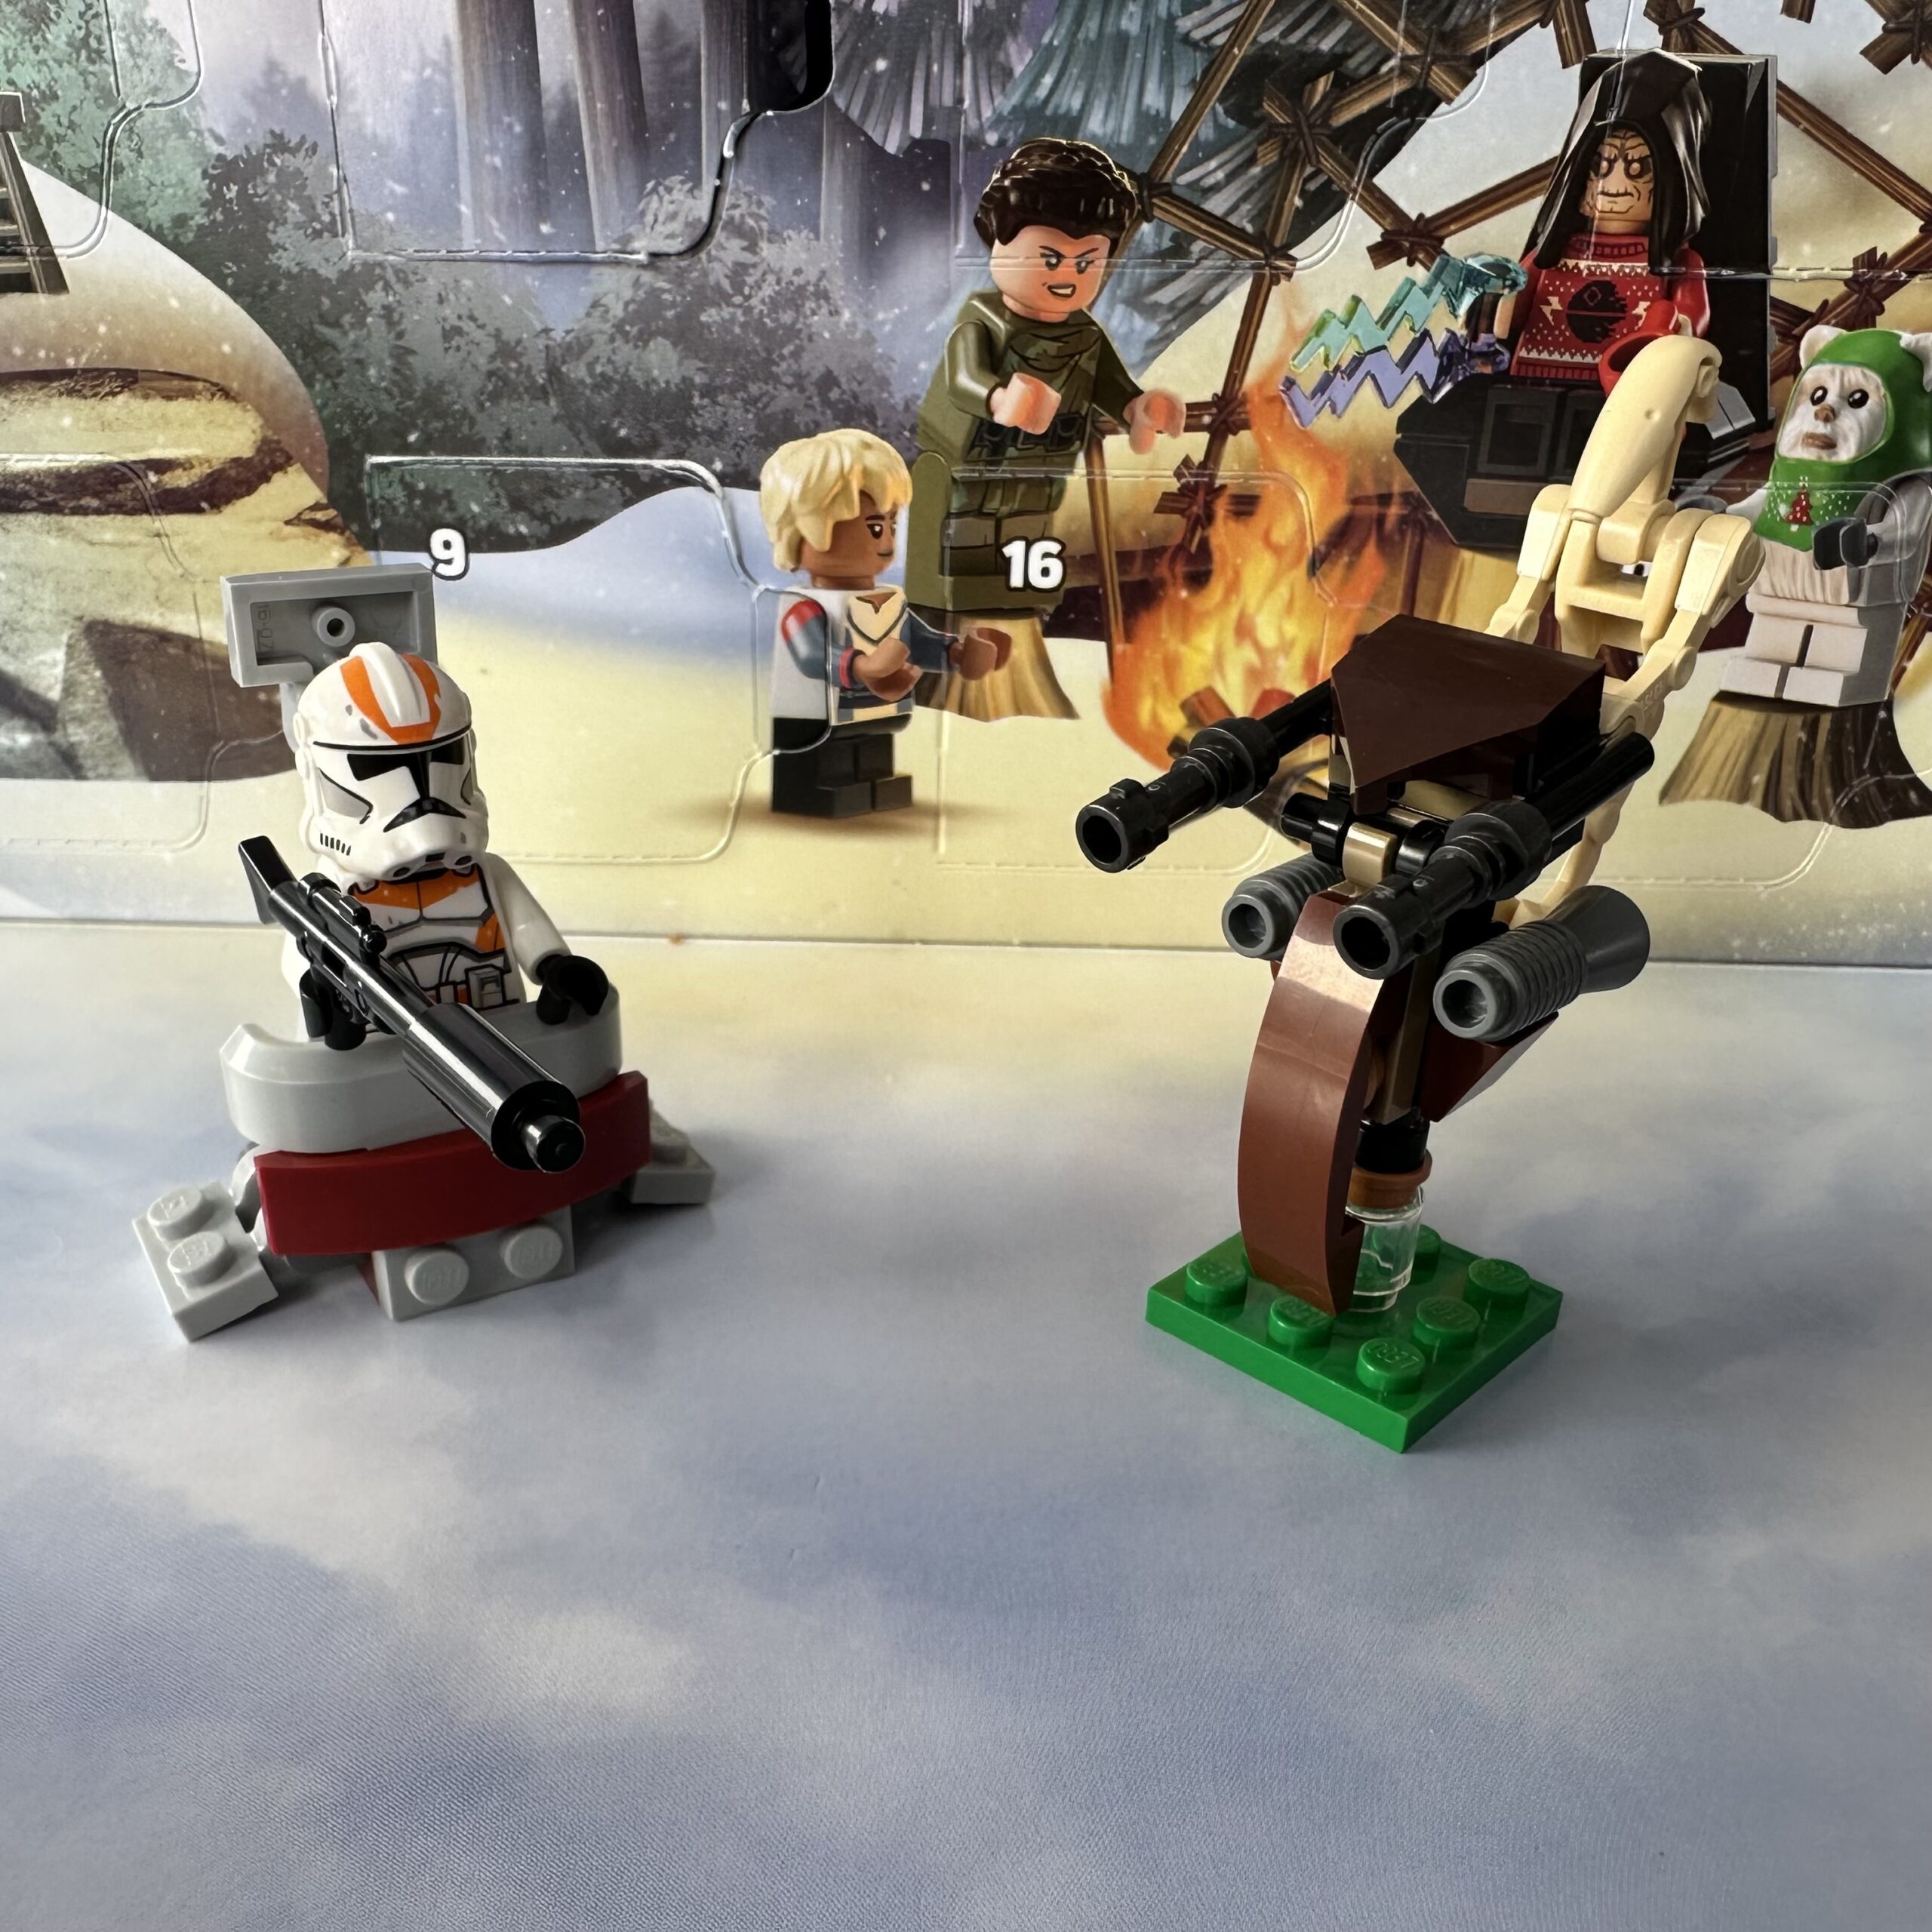 Two LEGO micro-builds: A clone commander minifigure with a long rifle sits inside a small gray protective fort on the left and a battle droid pilots a vertical hovering speeder on the right.